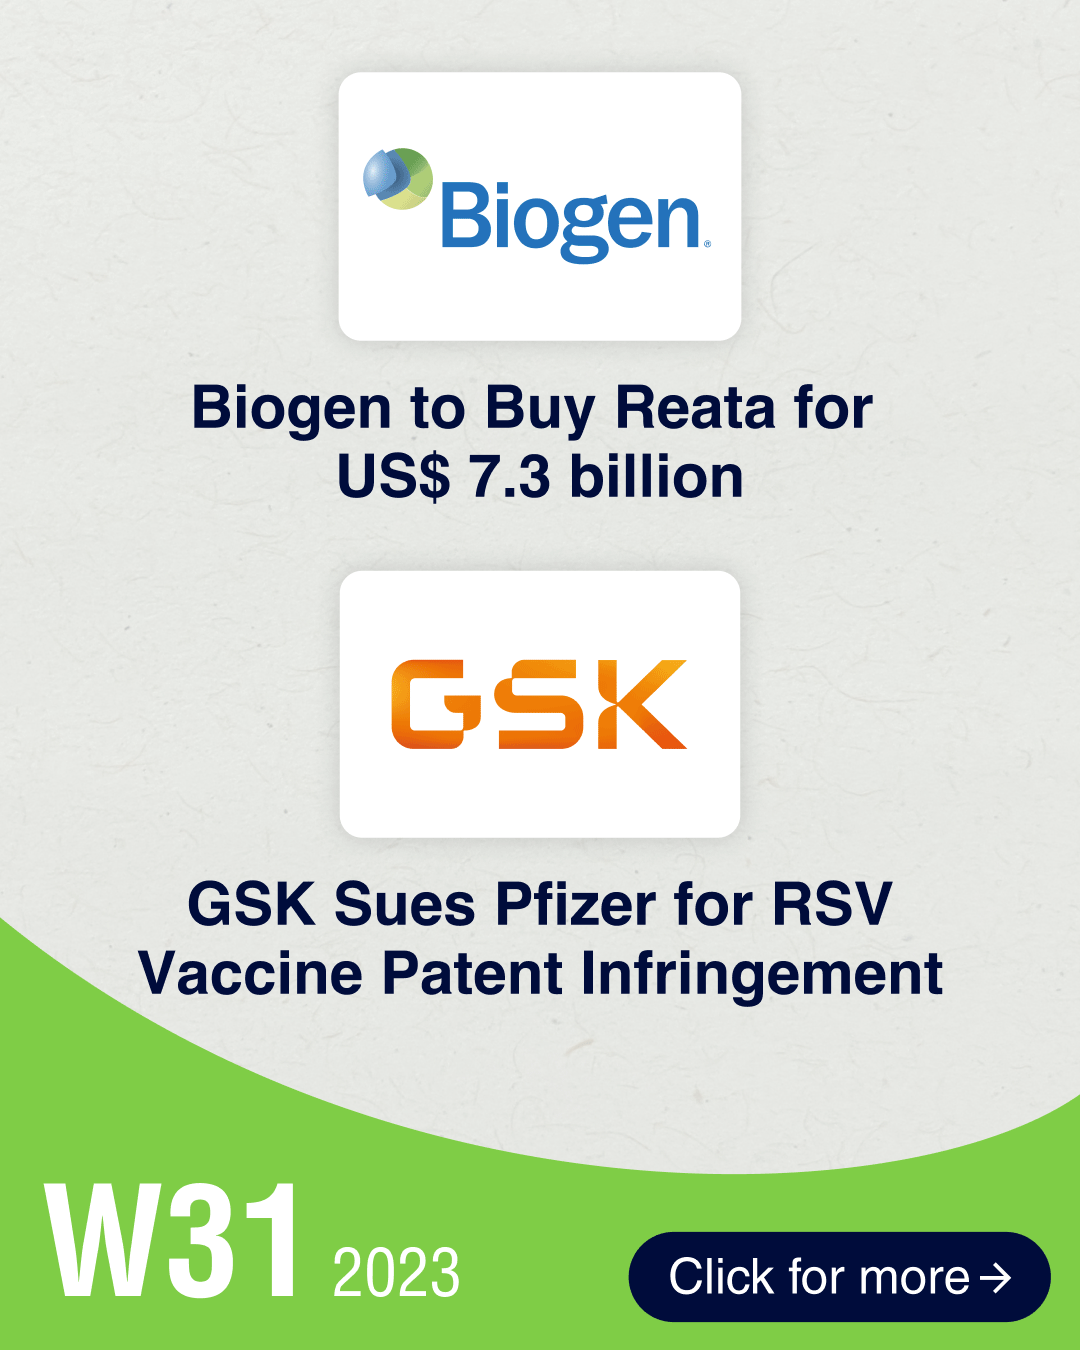 Biogen to acquire Reata for US$ 7.3 billion; GSK sues Pfizer for violation of its RSV jab patents